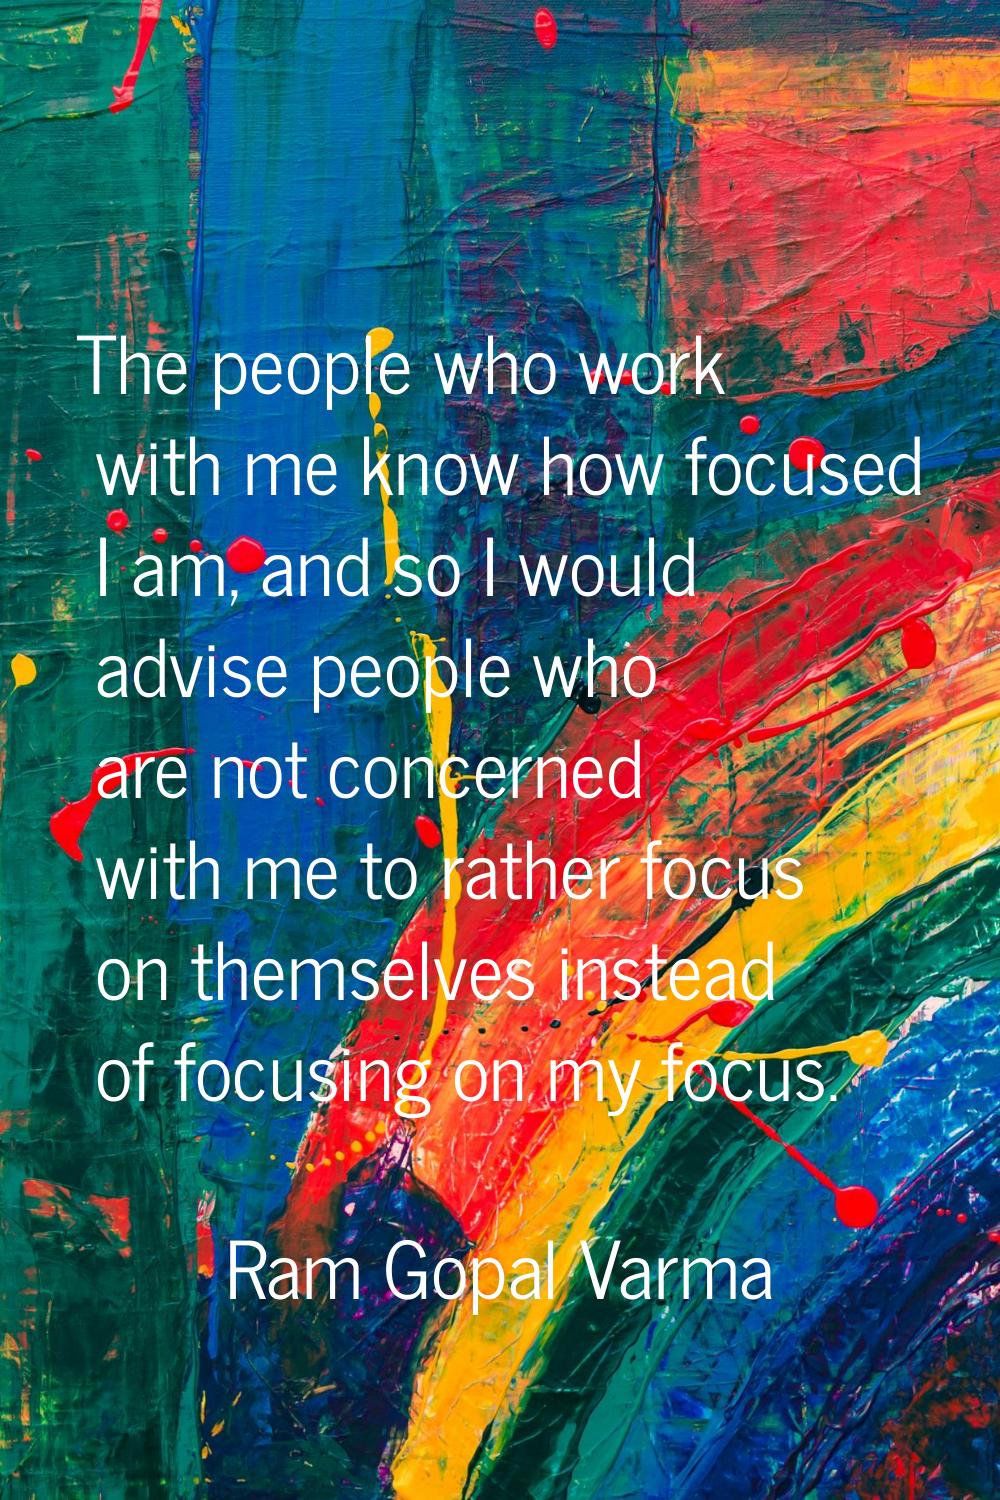 The people who work with me know how focused I am, and so I would advise people who are not concern